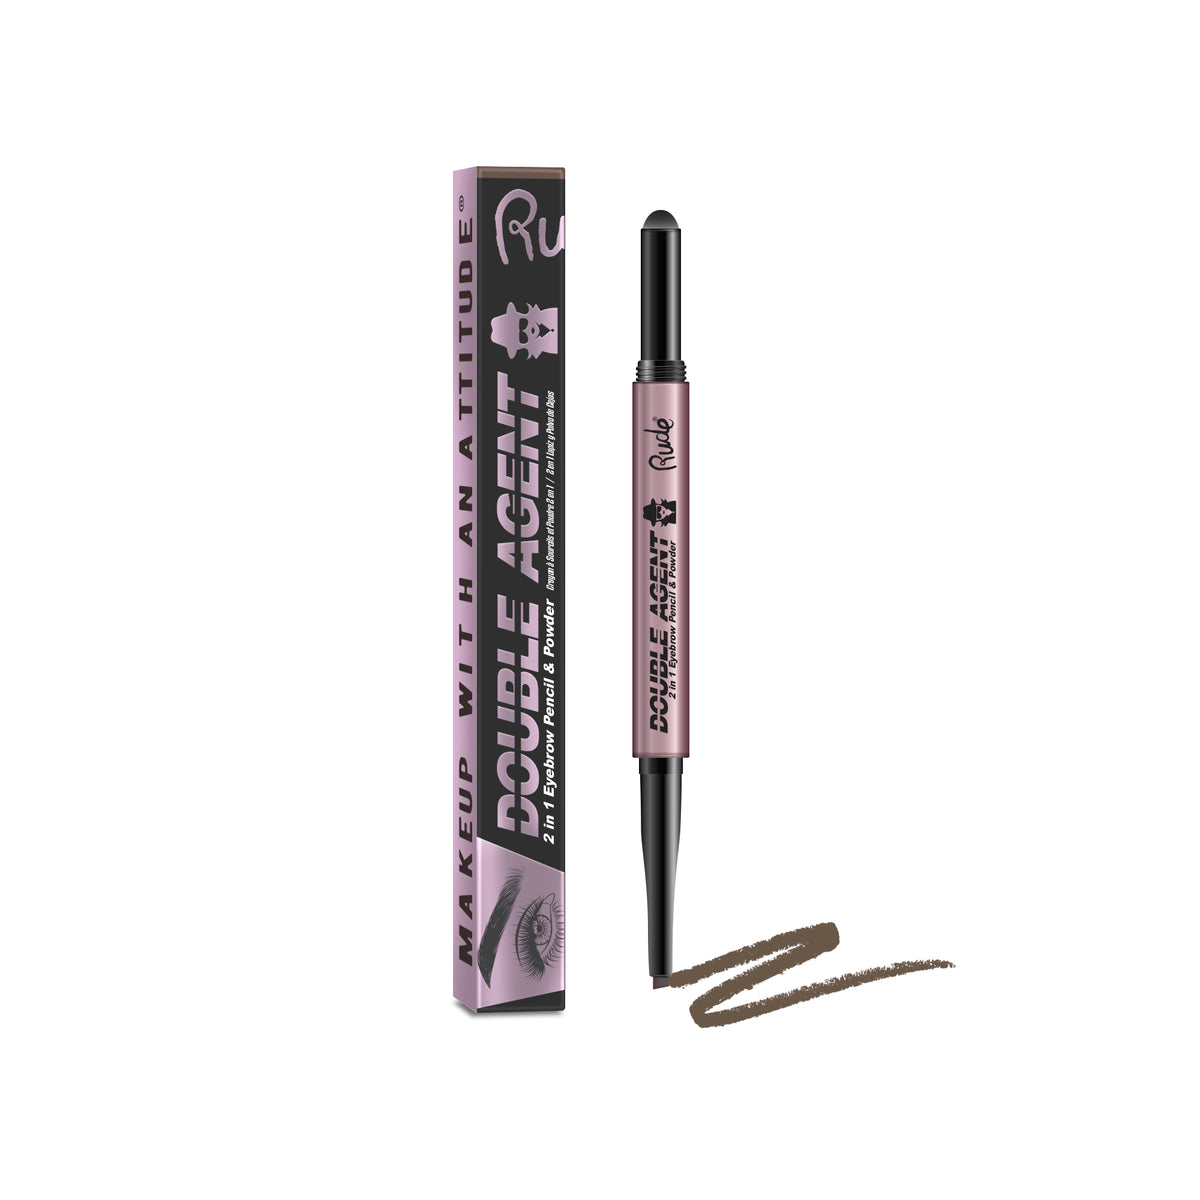 Double Agent 2 in 1 Eyebrow Pencil and Powder